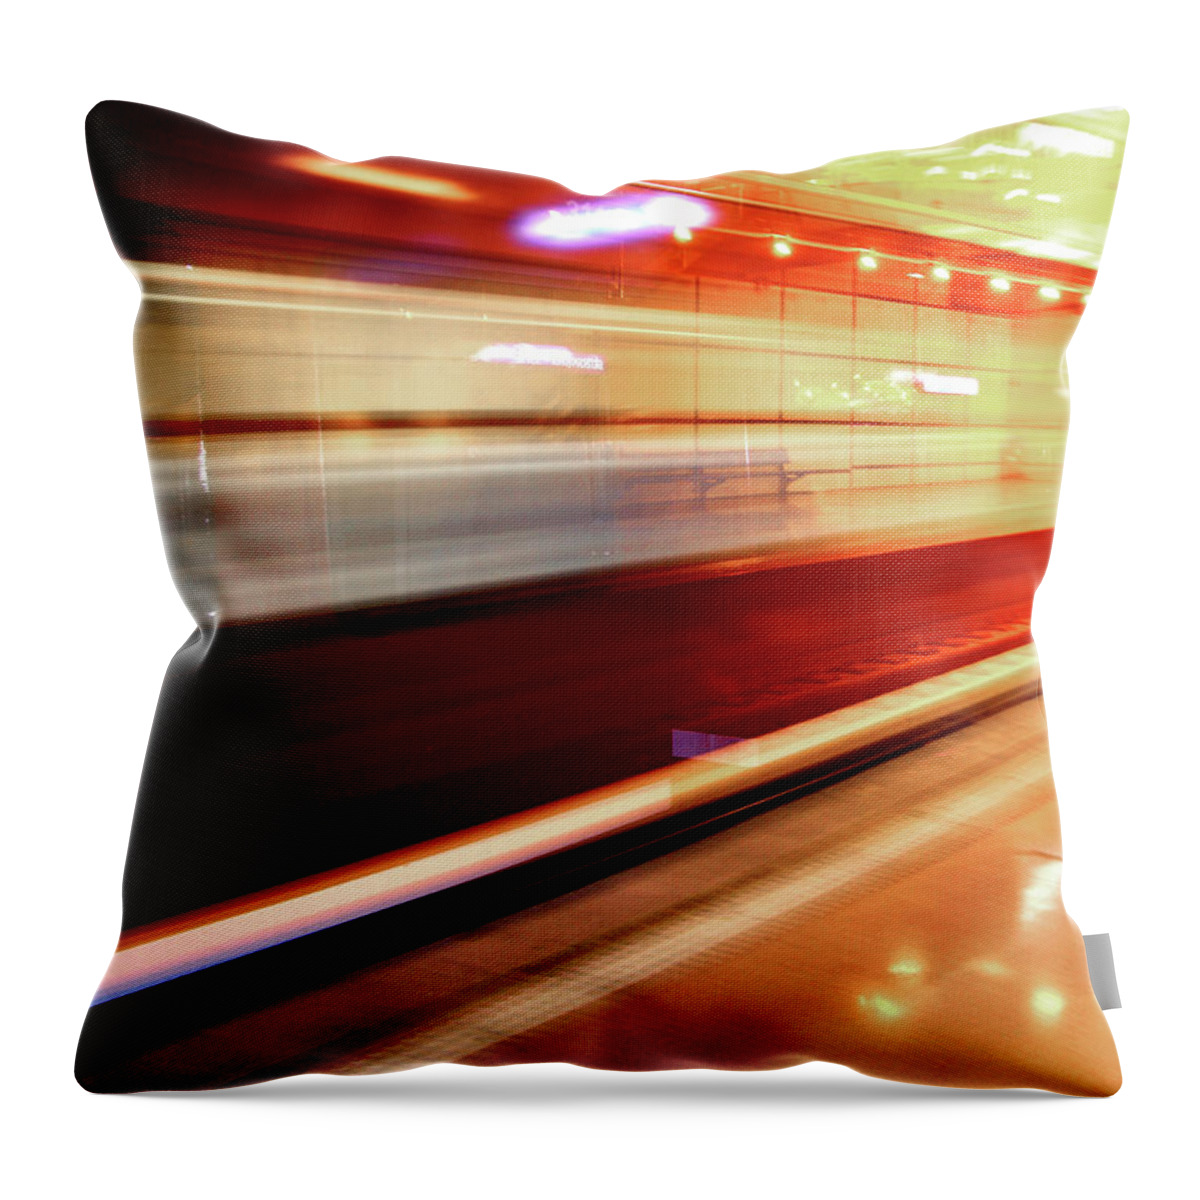 Train Throw Pillow featuring the photograph Red Train by Mikel Ortega